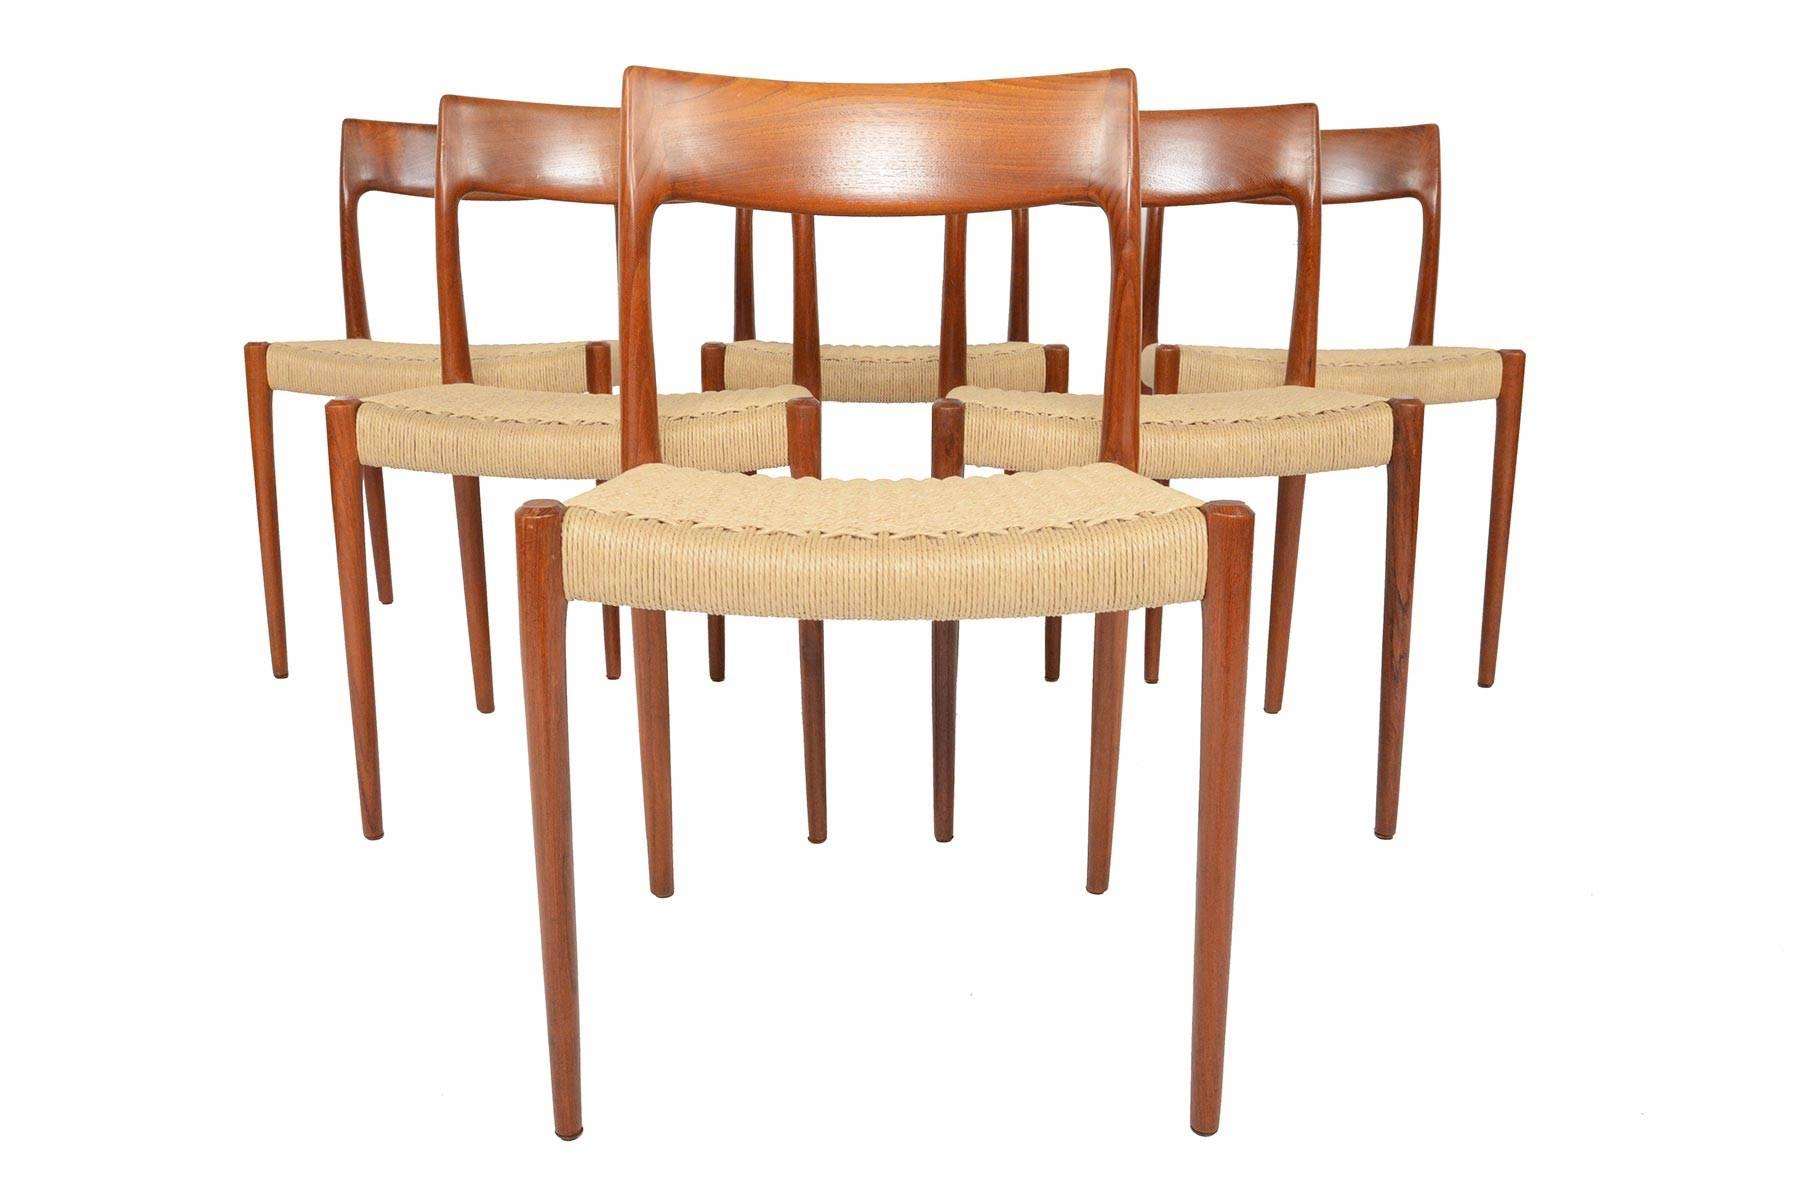 This set of six Møller model 77 dining chairs in teak are a rare find. Designed in 1959 by Niels Otto Møller for J.L. Møller, this set is crafted in solid teak. Chairs not only boast superior craftsmanship throughout, but a traditional hand crafted